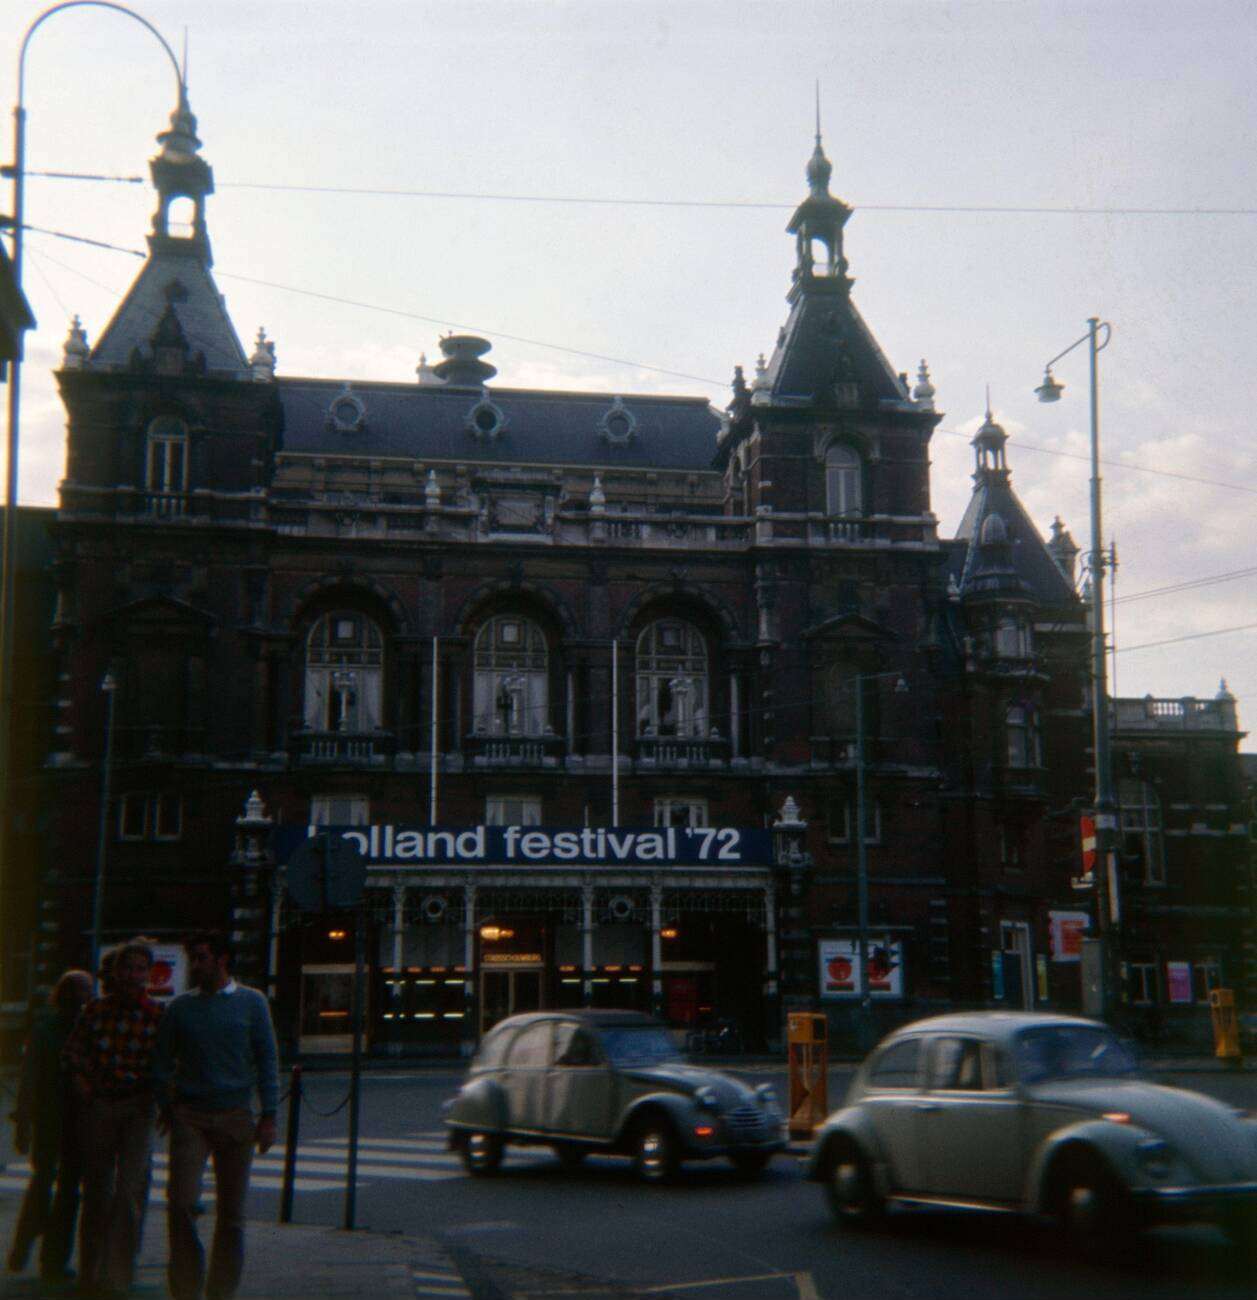 A vintage circa 1972 photograph of a building in Amsterdam, The Netherlands, with a banner for Holland Festival '72.